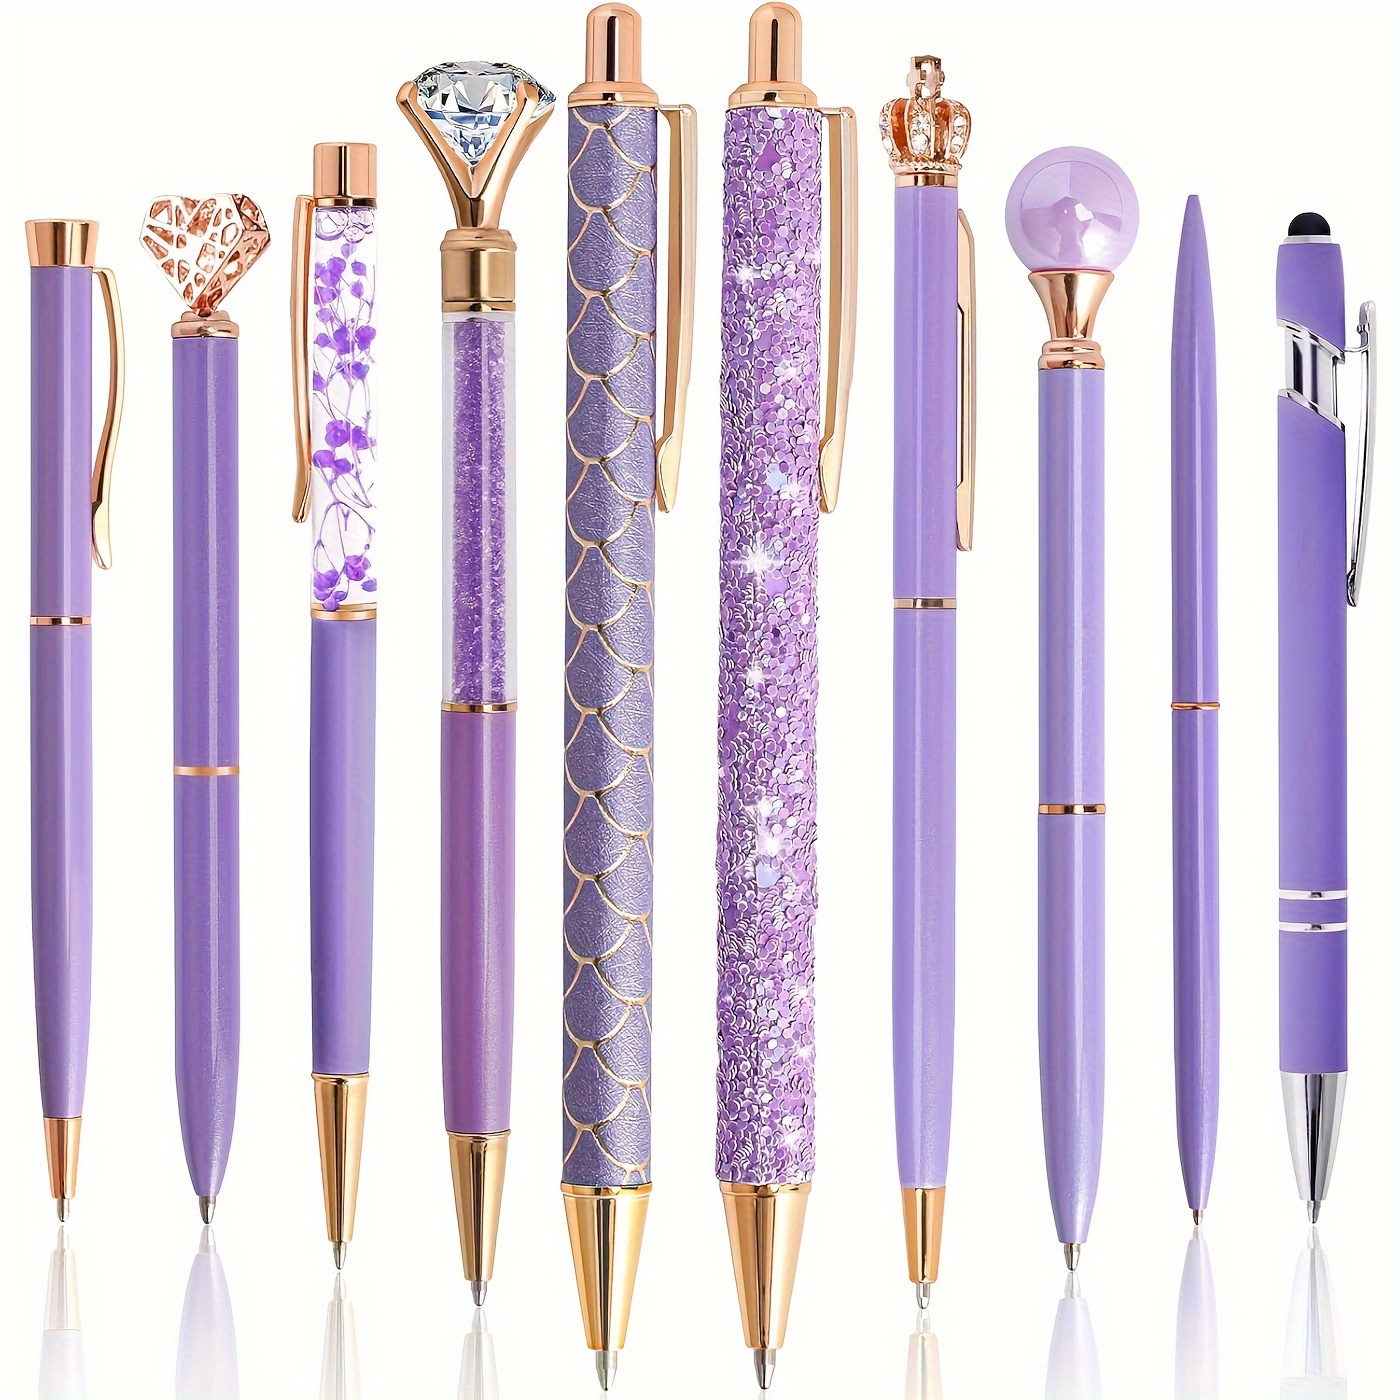 

premium Quality" Elegant 10-piece Purple Ballpoint Pen Set For Women - Quick-dry Ink, Retractable Metal Crystal Pens, Perfect For Office & School Supplies, Ideal Gift For Her